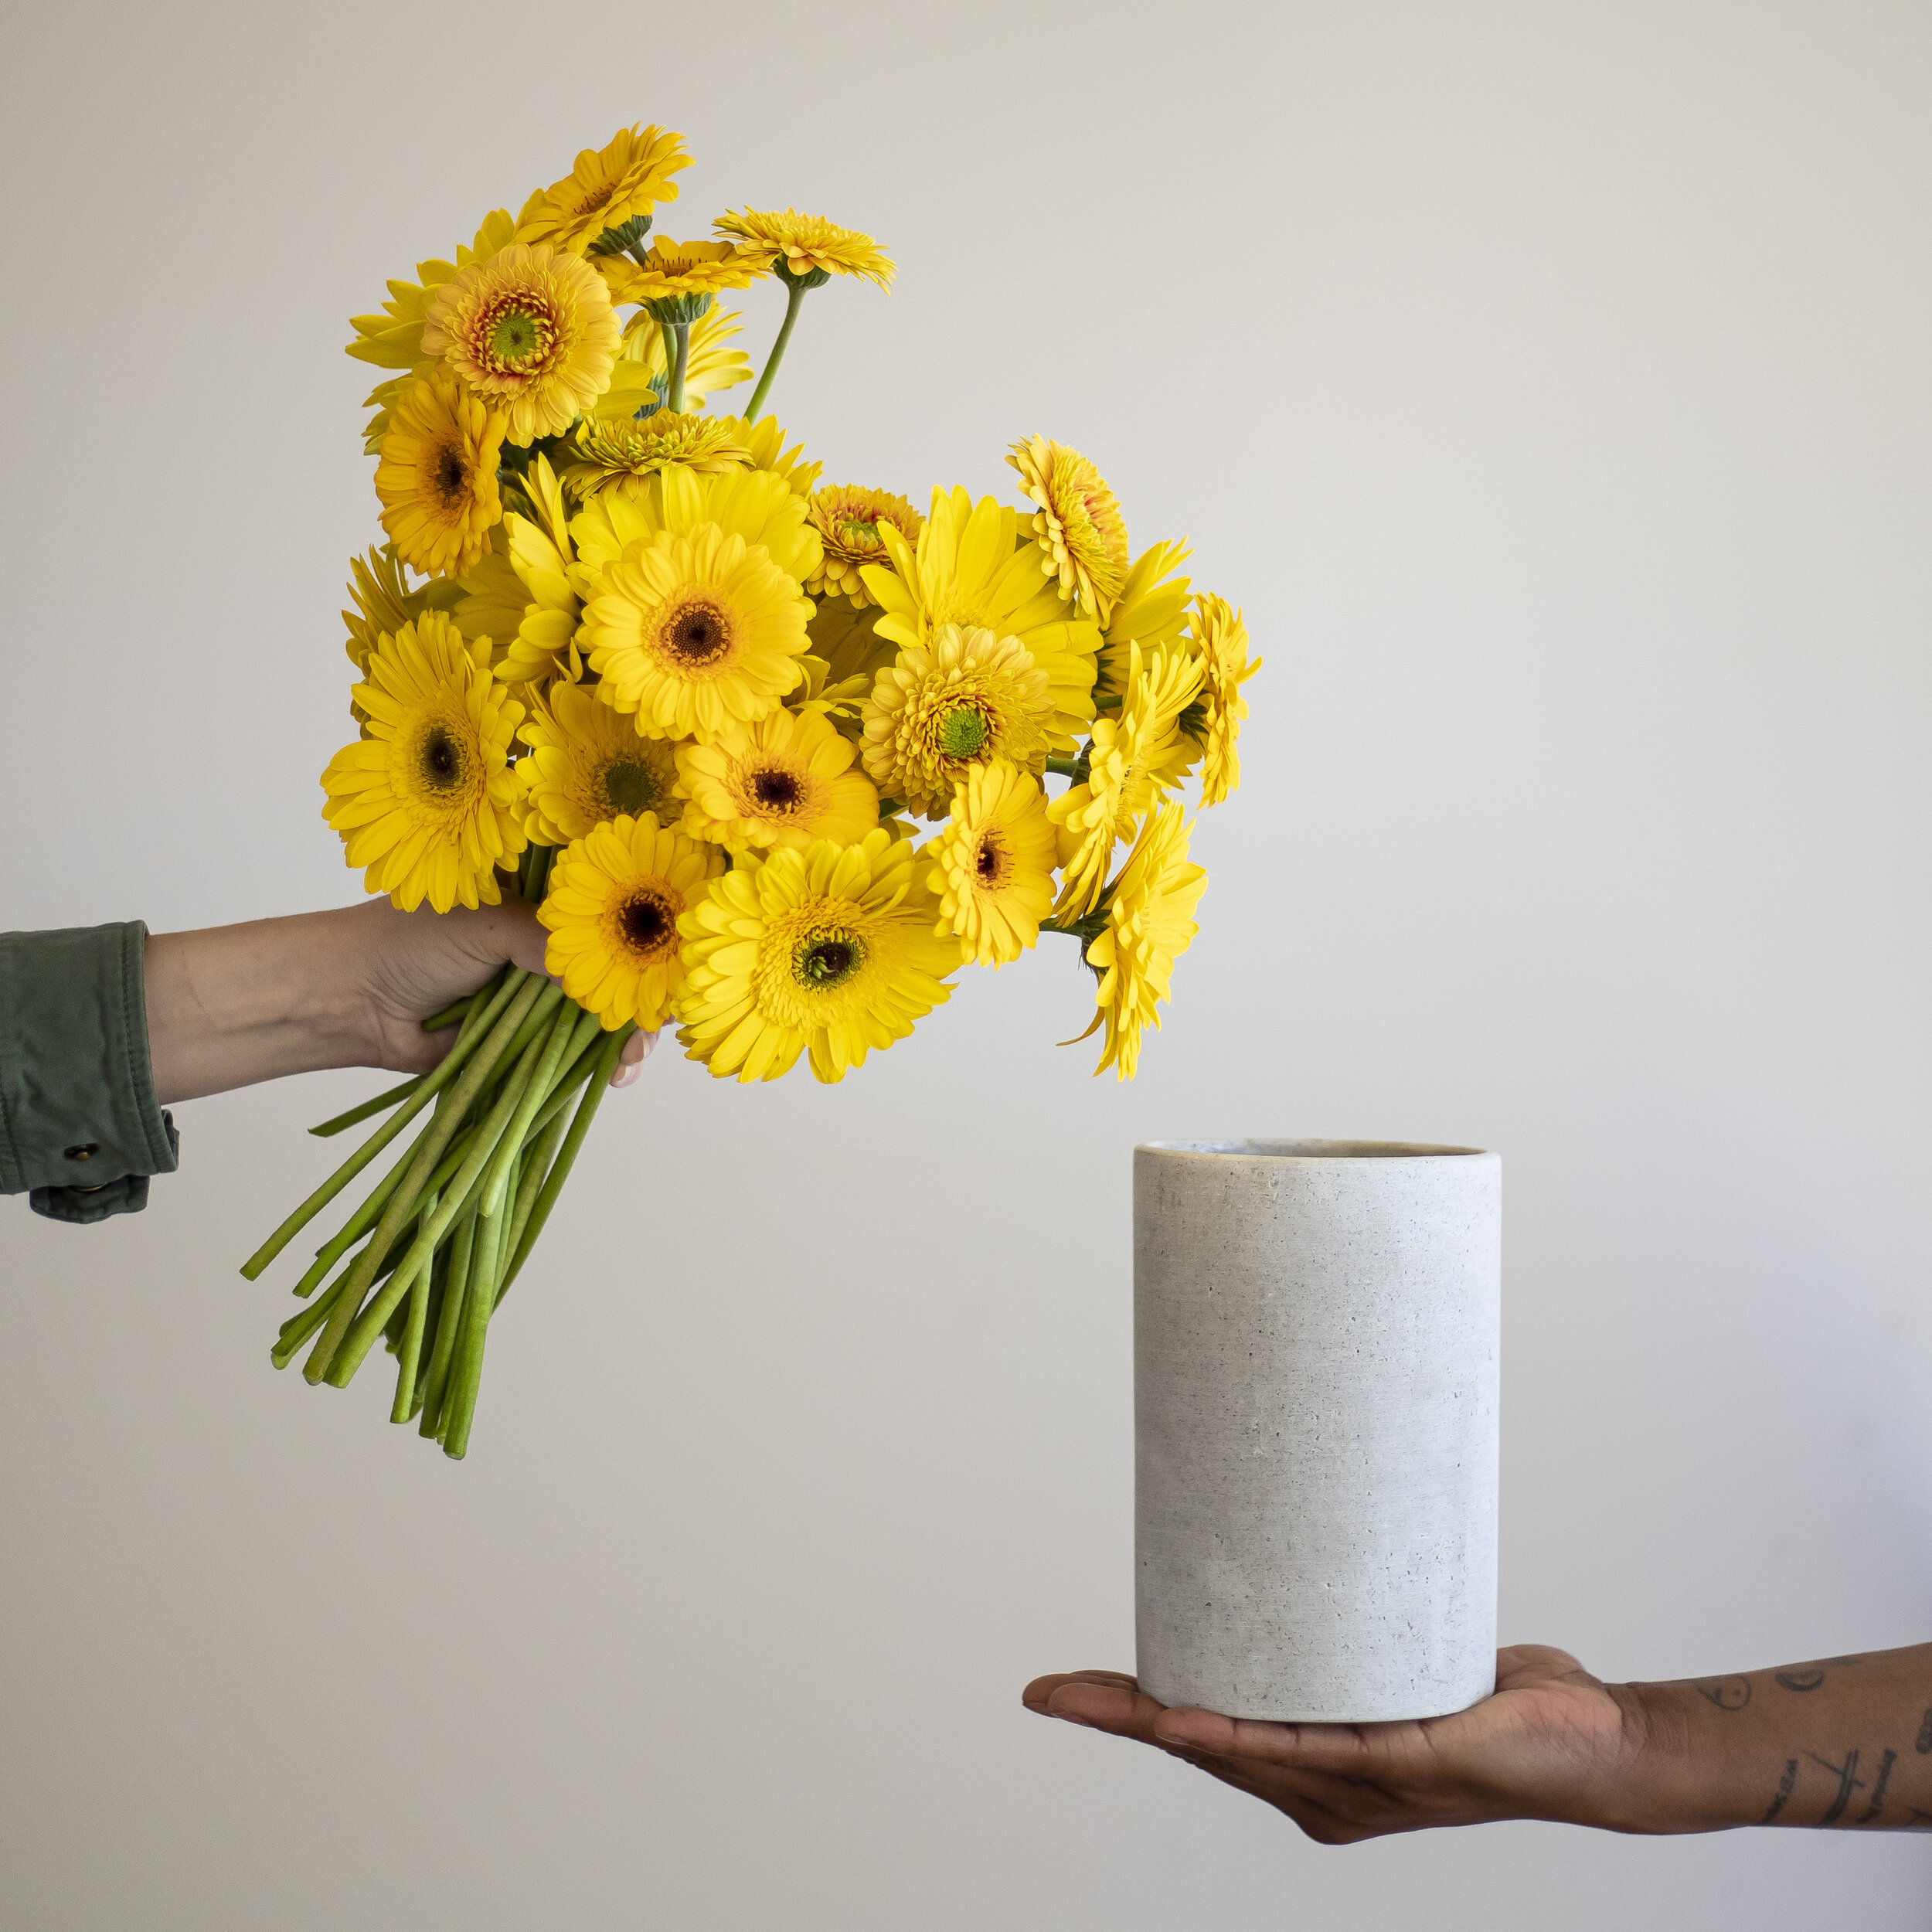 A bouquet of yellow daisies being held in one hand, with a white stone vase held in another hand